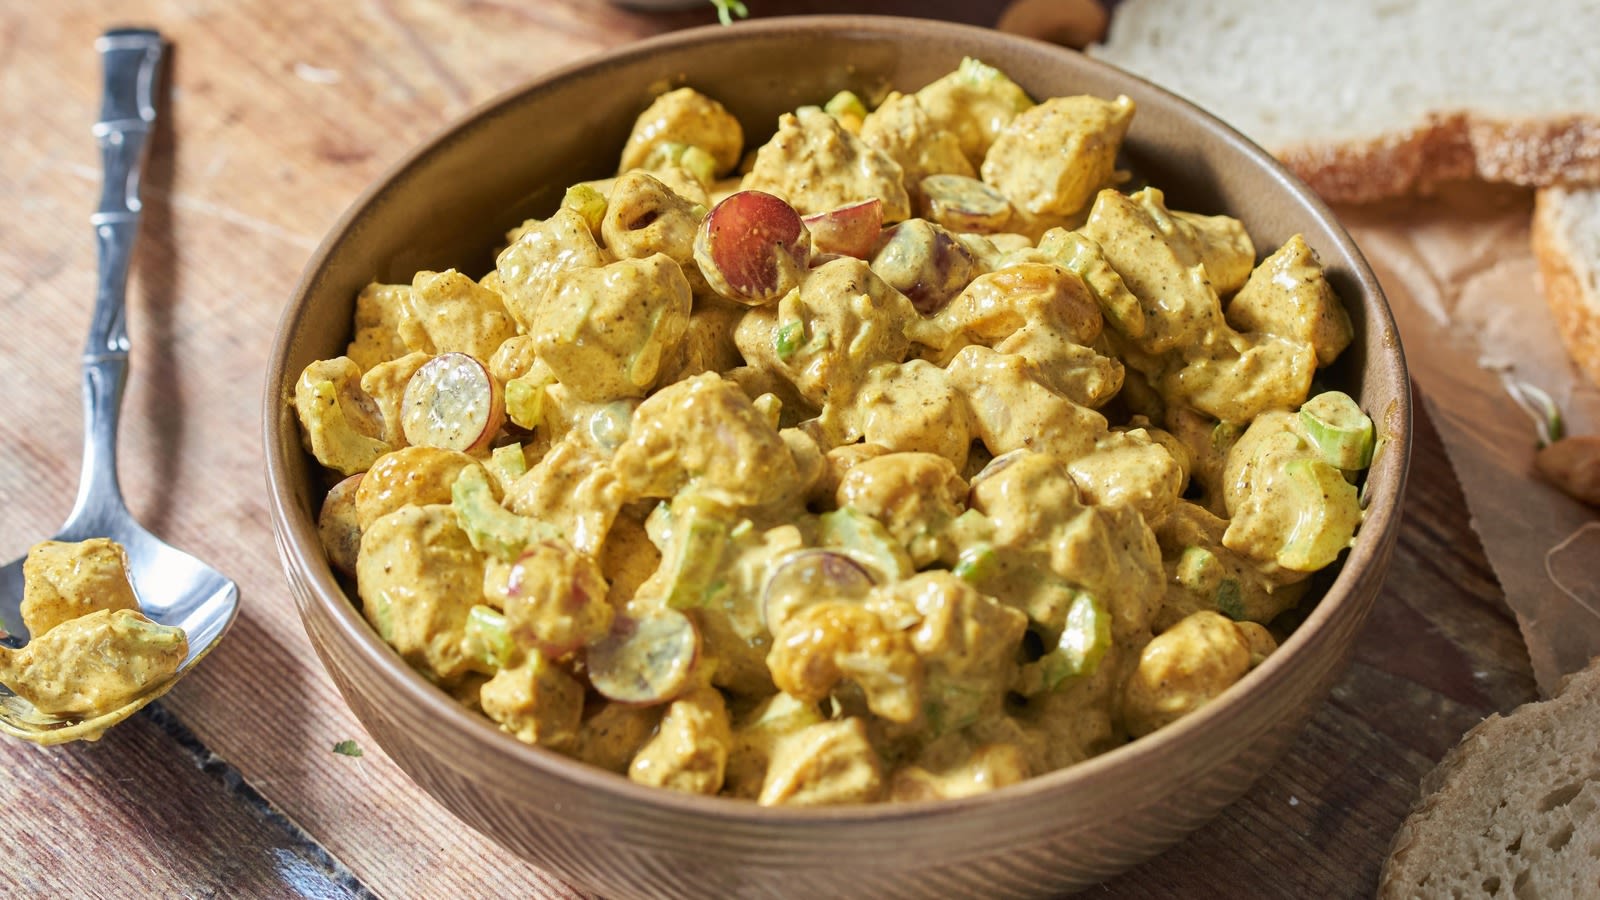 Curry Powder Is The Surefire Way To Heat Up Chicken Salad